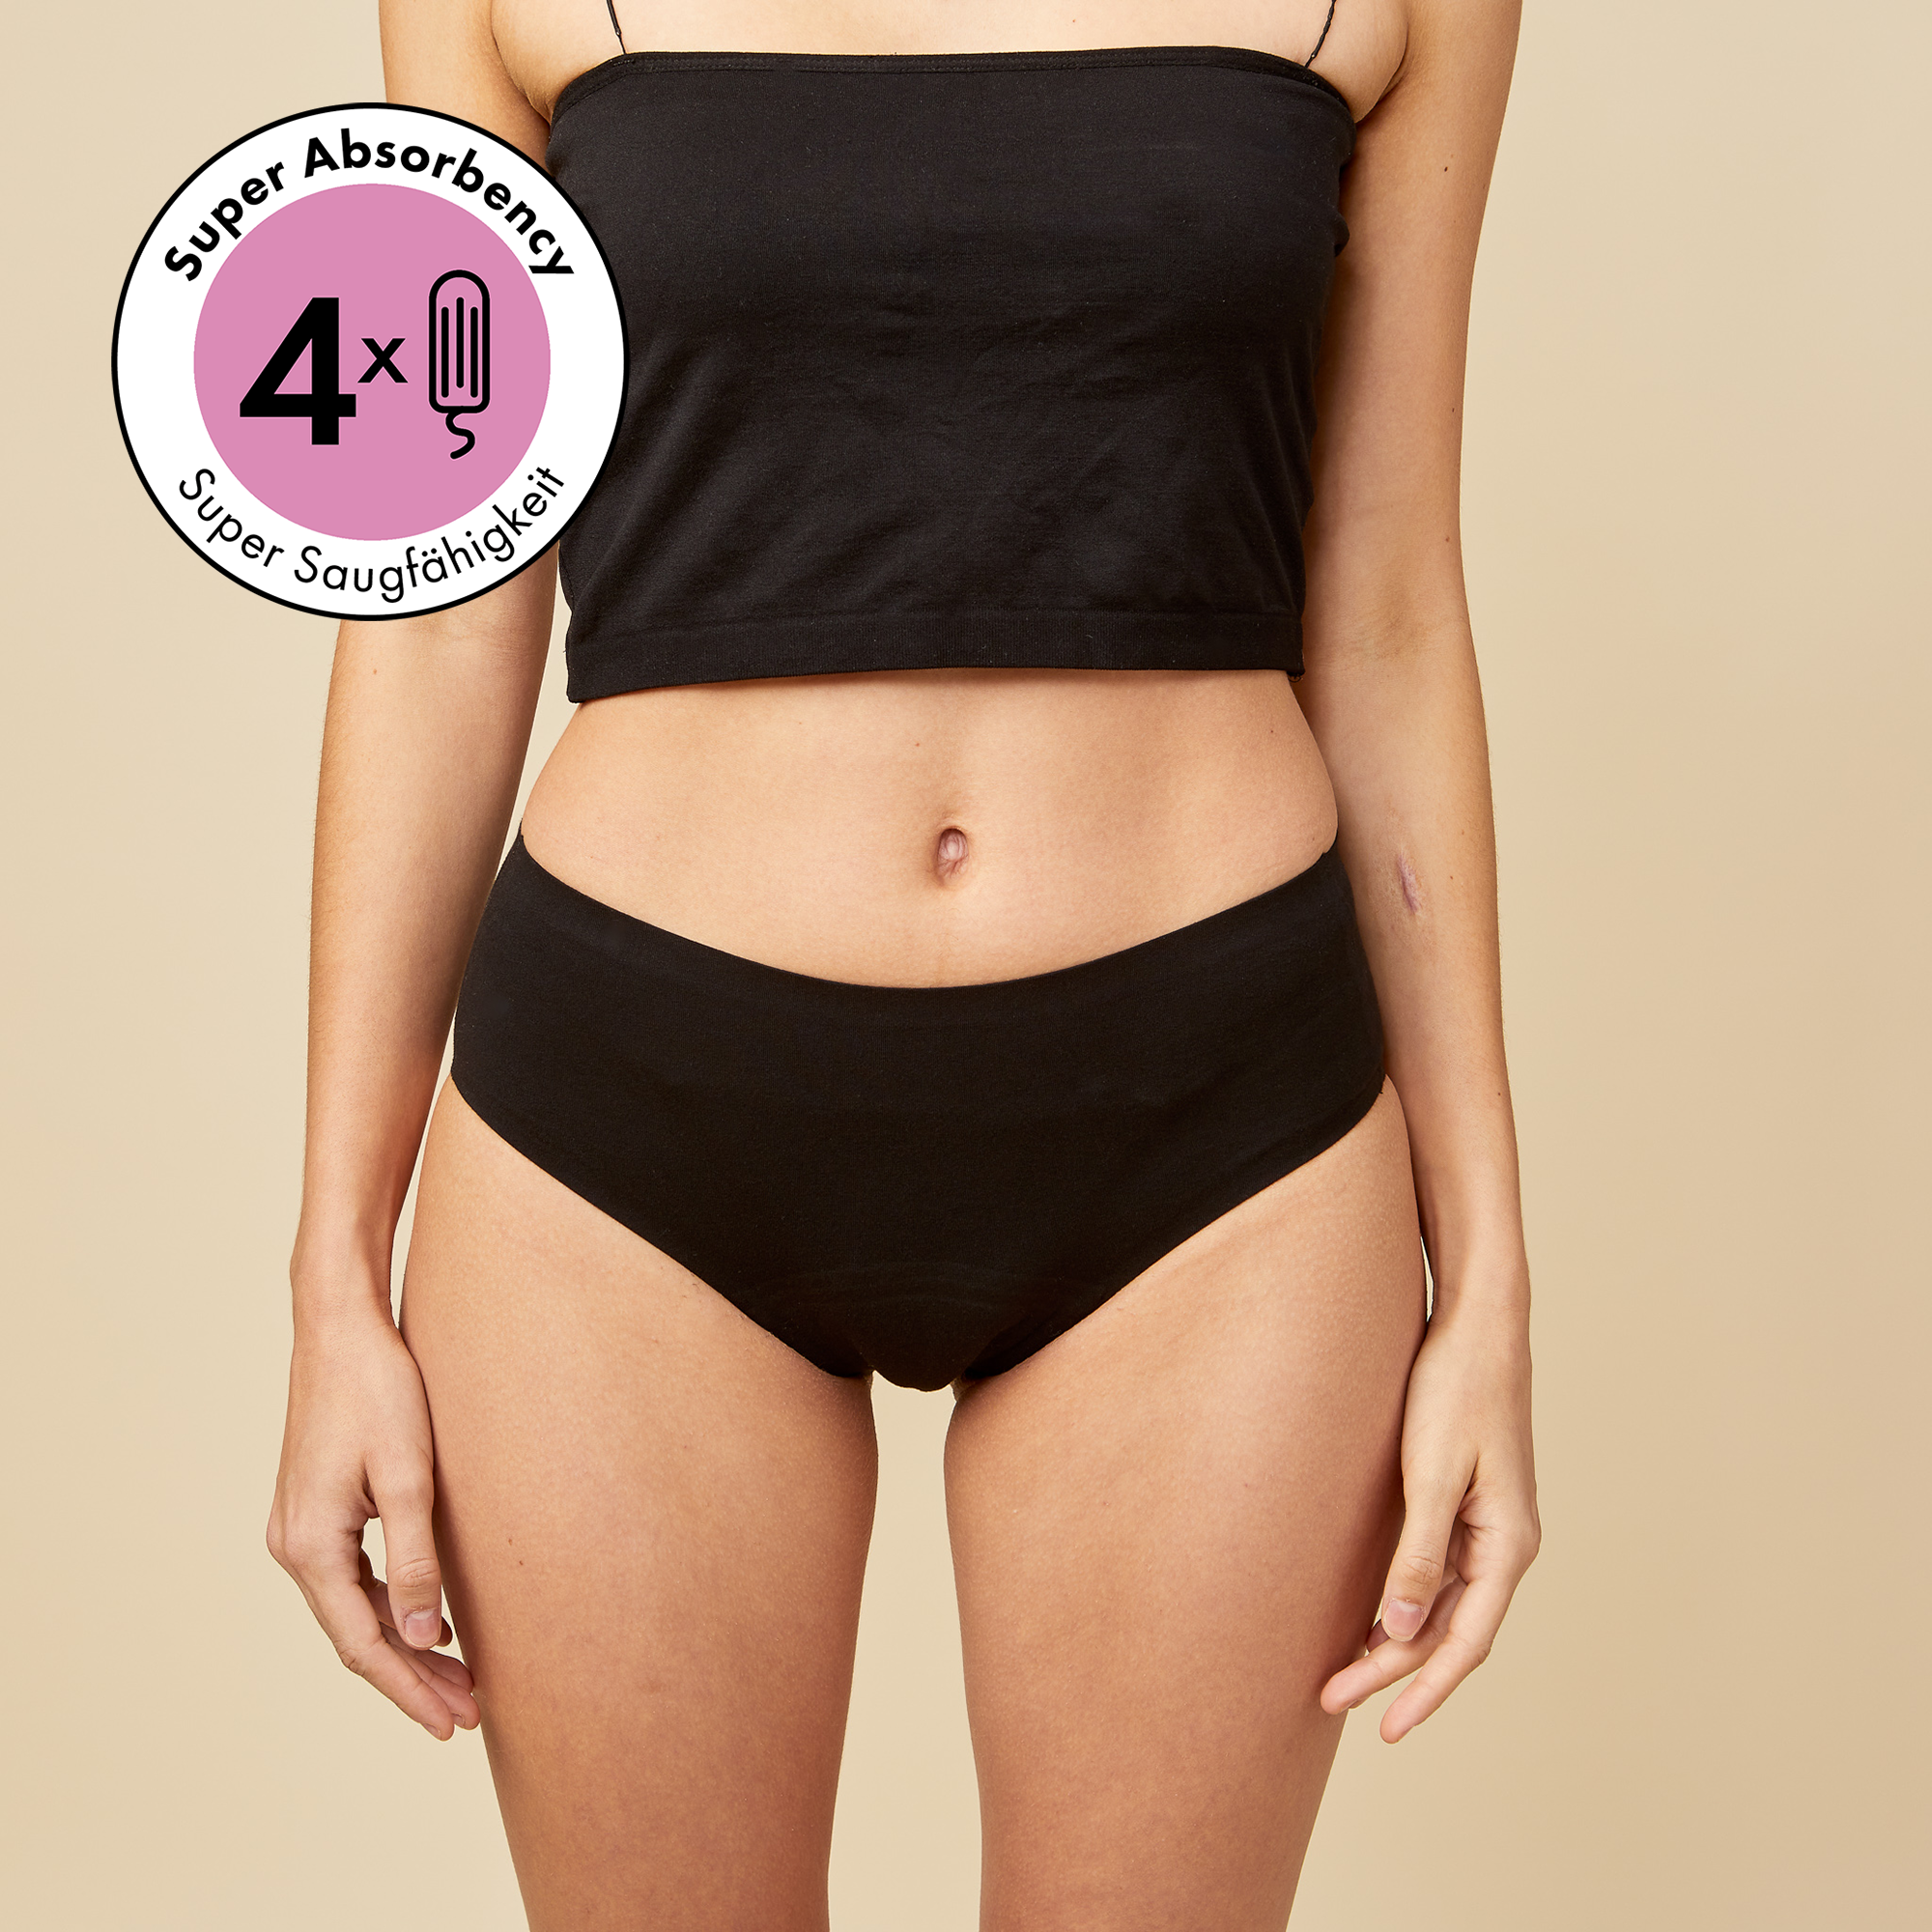 dais Hipster Period Underwear made of organic cotton shown from the front. An icon showing that the underwear is super absorbent up to 4 tampons worth of blood.